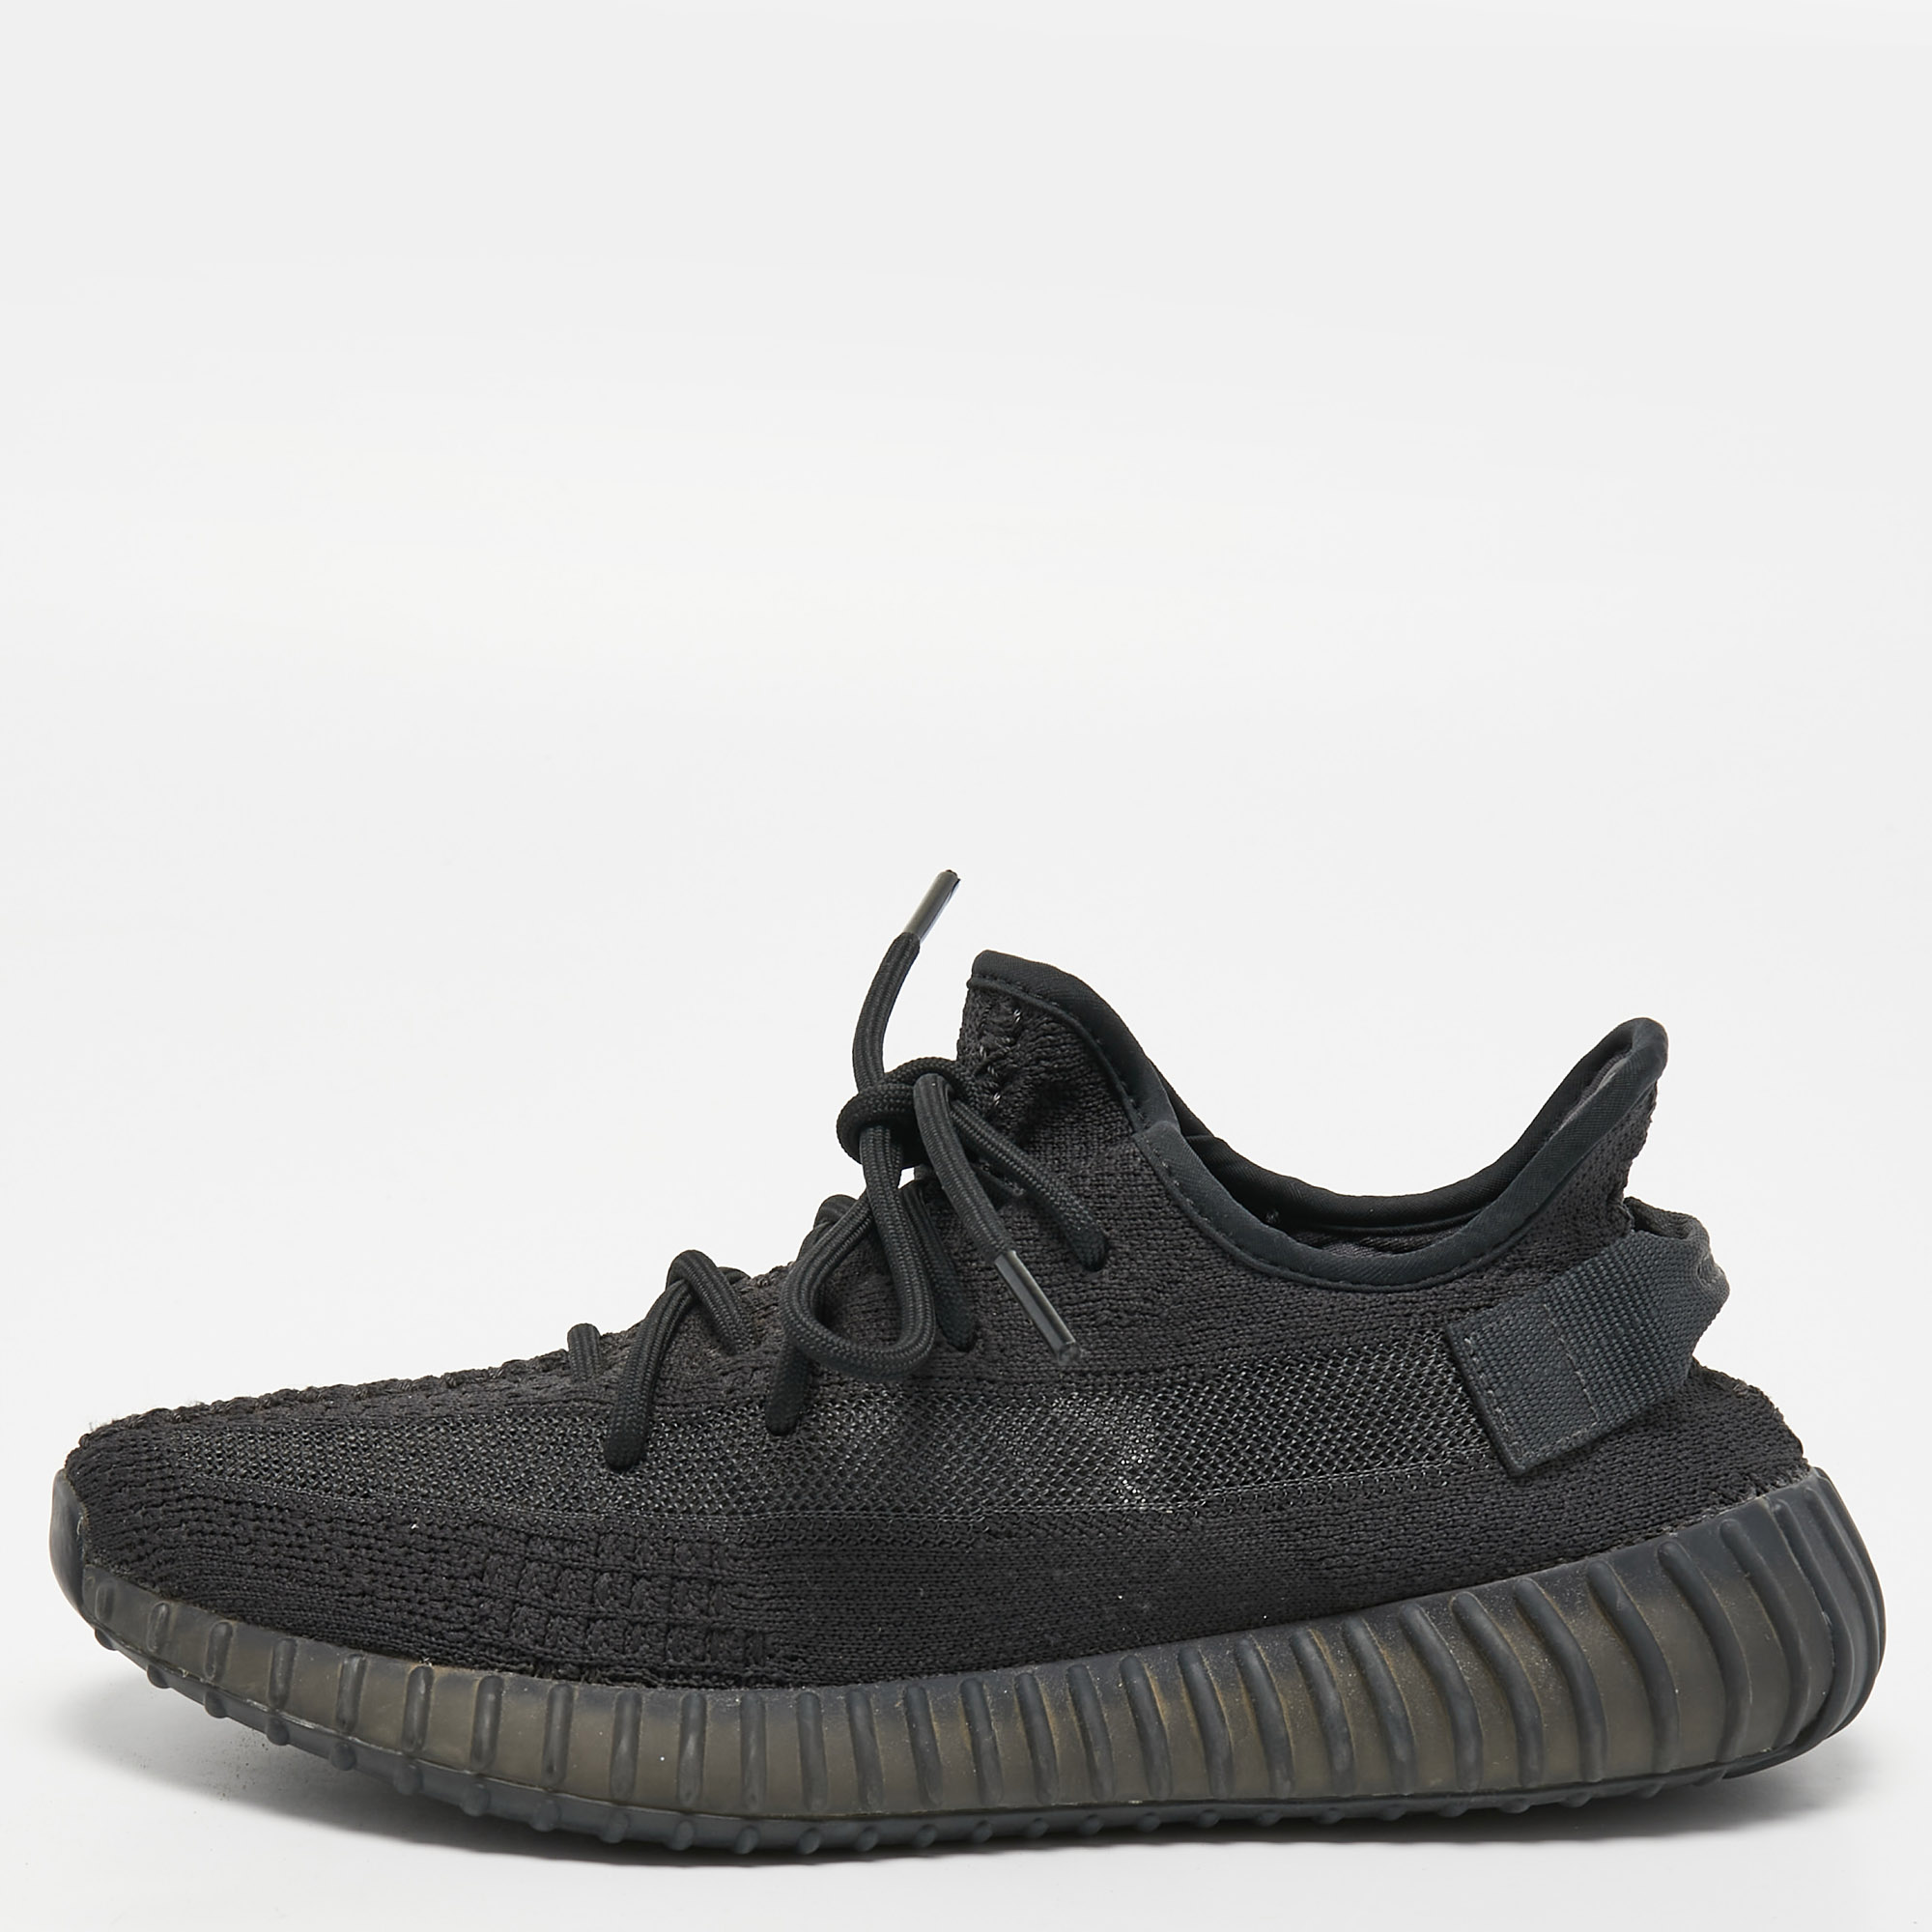 Yeezy X Adidas Black Knit Fabric Boost 350 V2 Static Black Sneakers Size 41 1/3